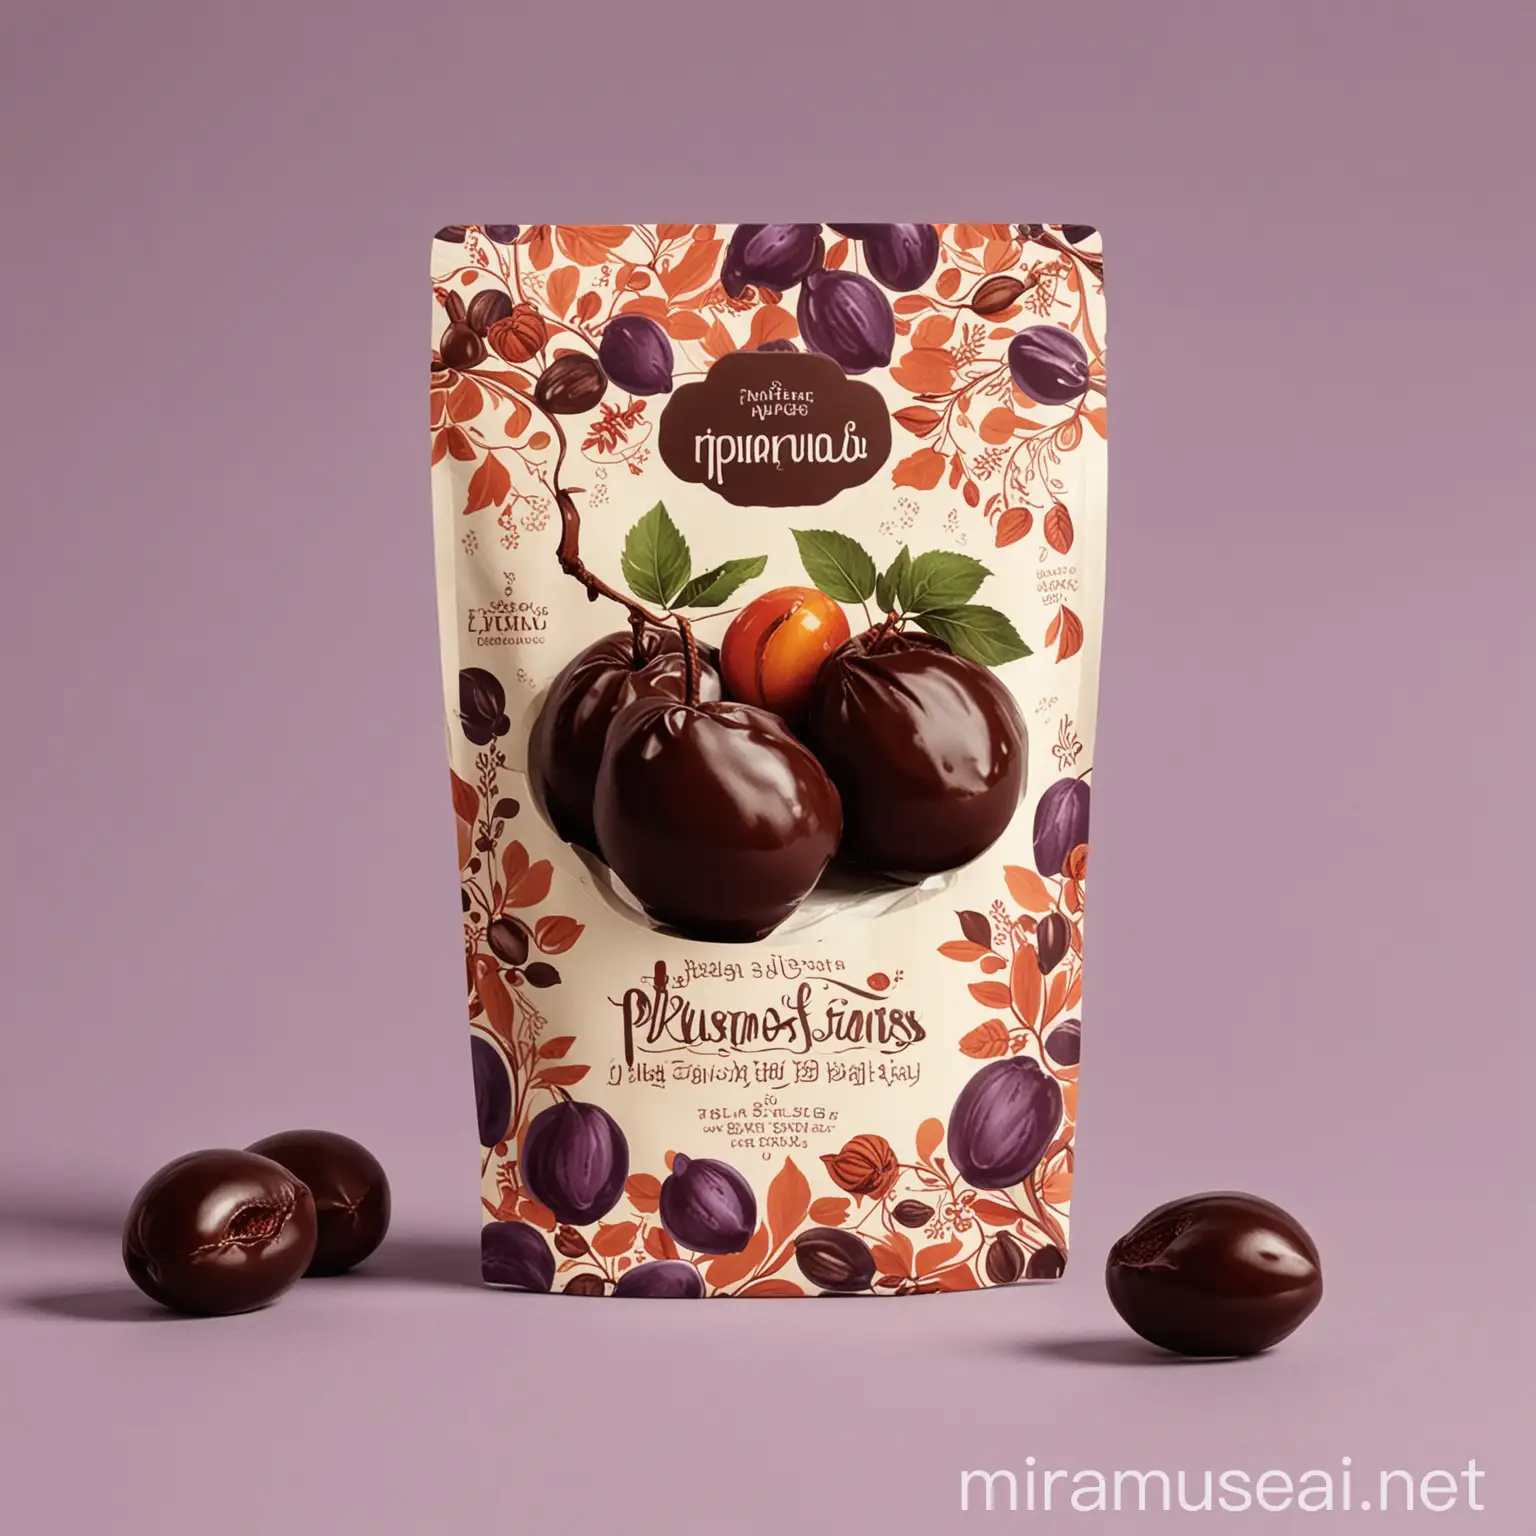 packaging illustration for dried plums covered in chocolate. the theme is "chocolate covered plums stimulate all senses". The main color is #223C6F